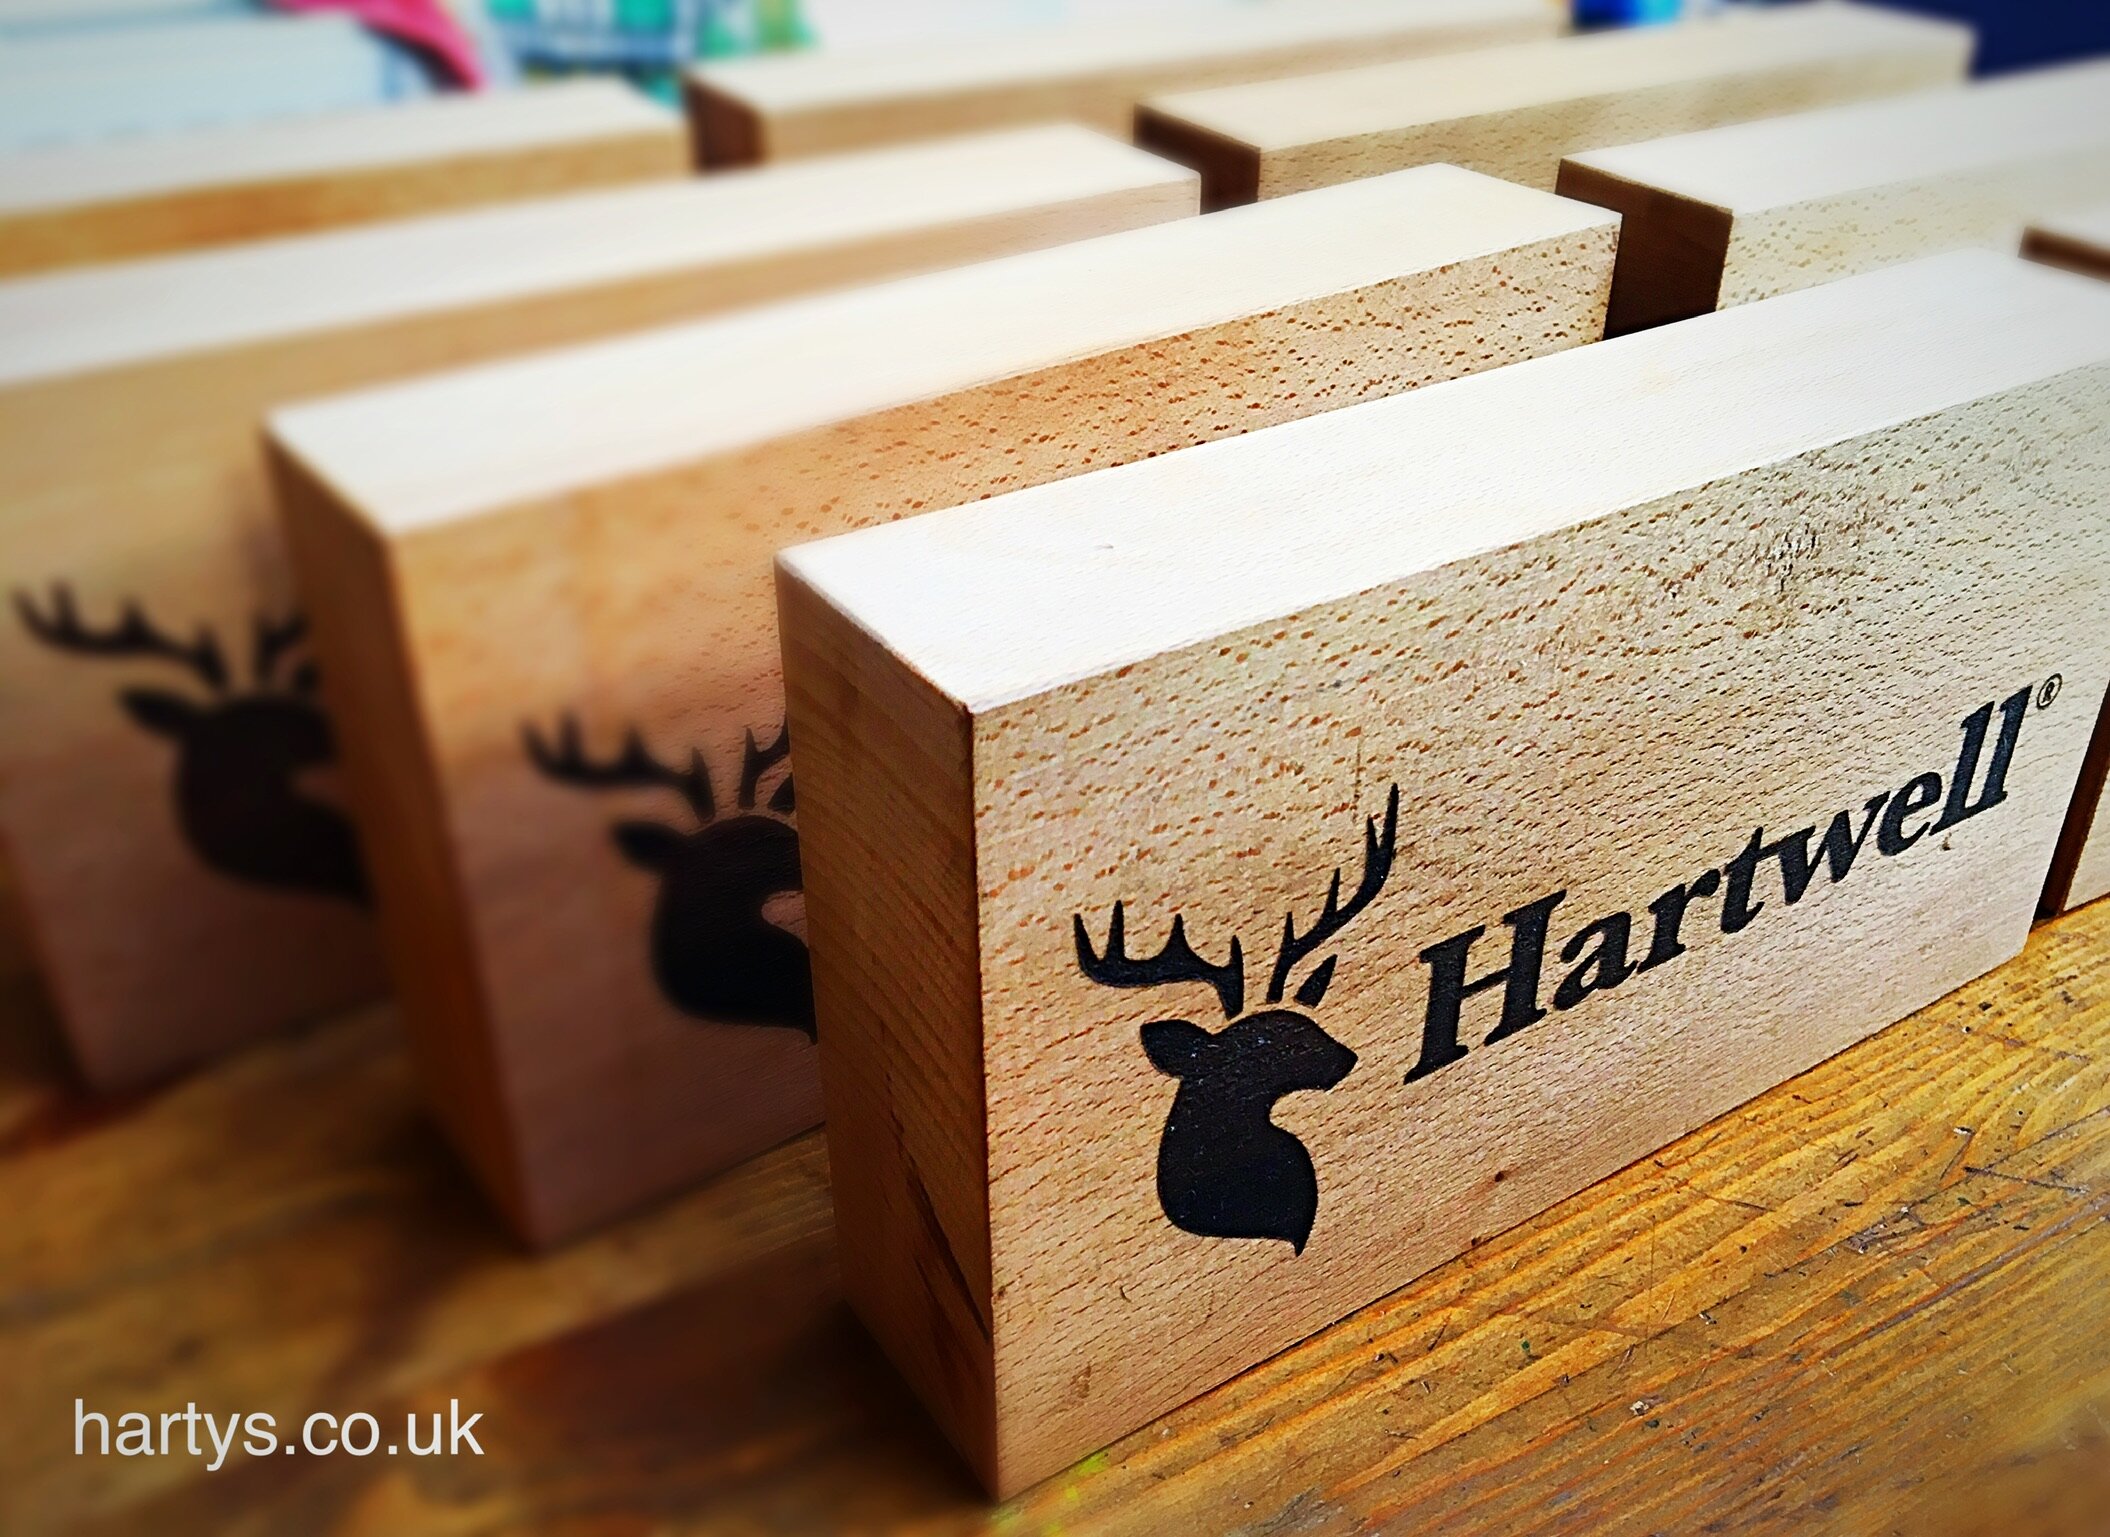 Hartwell Country Wear  stock their clothing in stores around the UK and Canada. They wanted a stand out item to sit alongside their clothing range that represents their brand. These solid wood blocks made from reclaimed beech and make a beautiful statement.